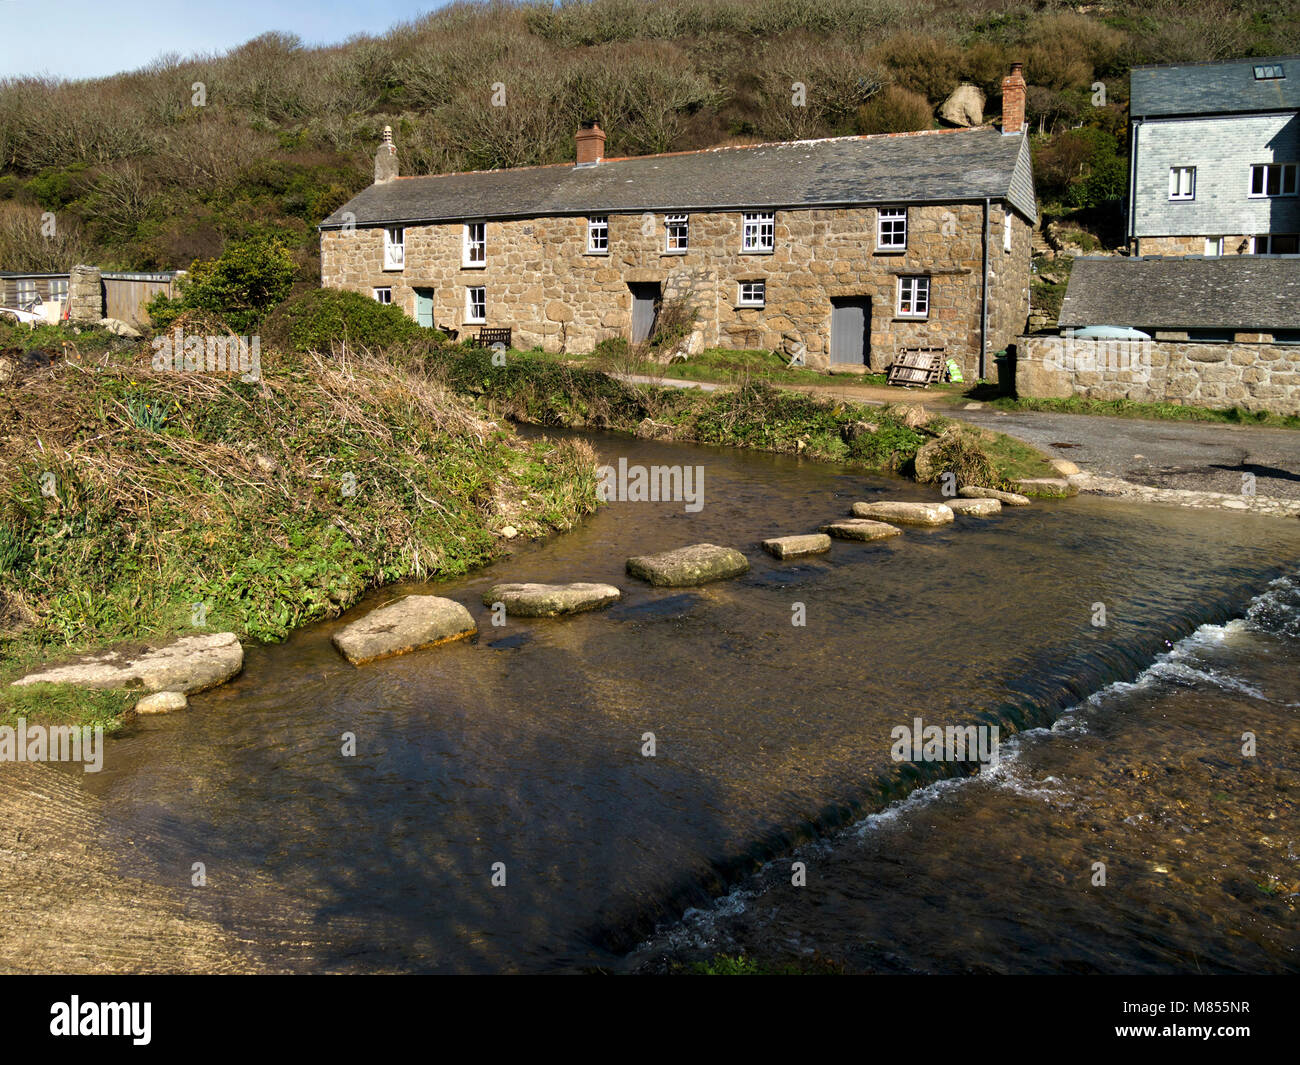 Old cottages, stepping stones and ford across river at Penberth Cove, Cornwall, England, UK. Location was used during filming of Poldark TV series. Stock Photo